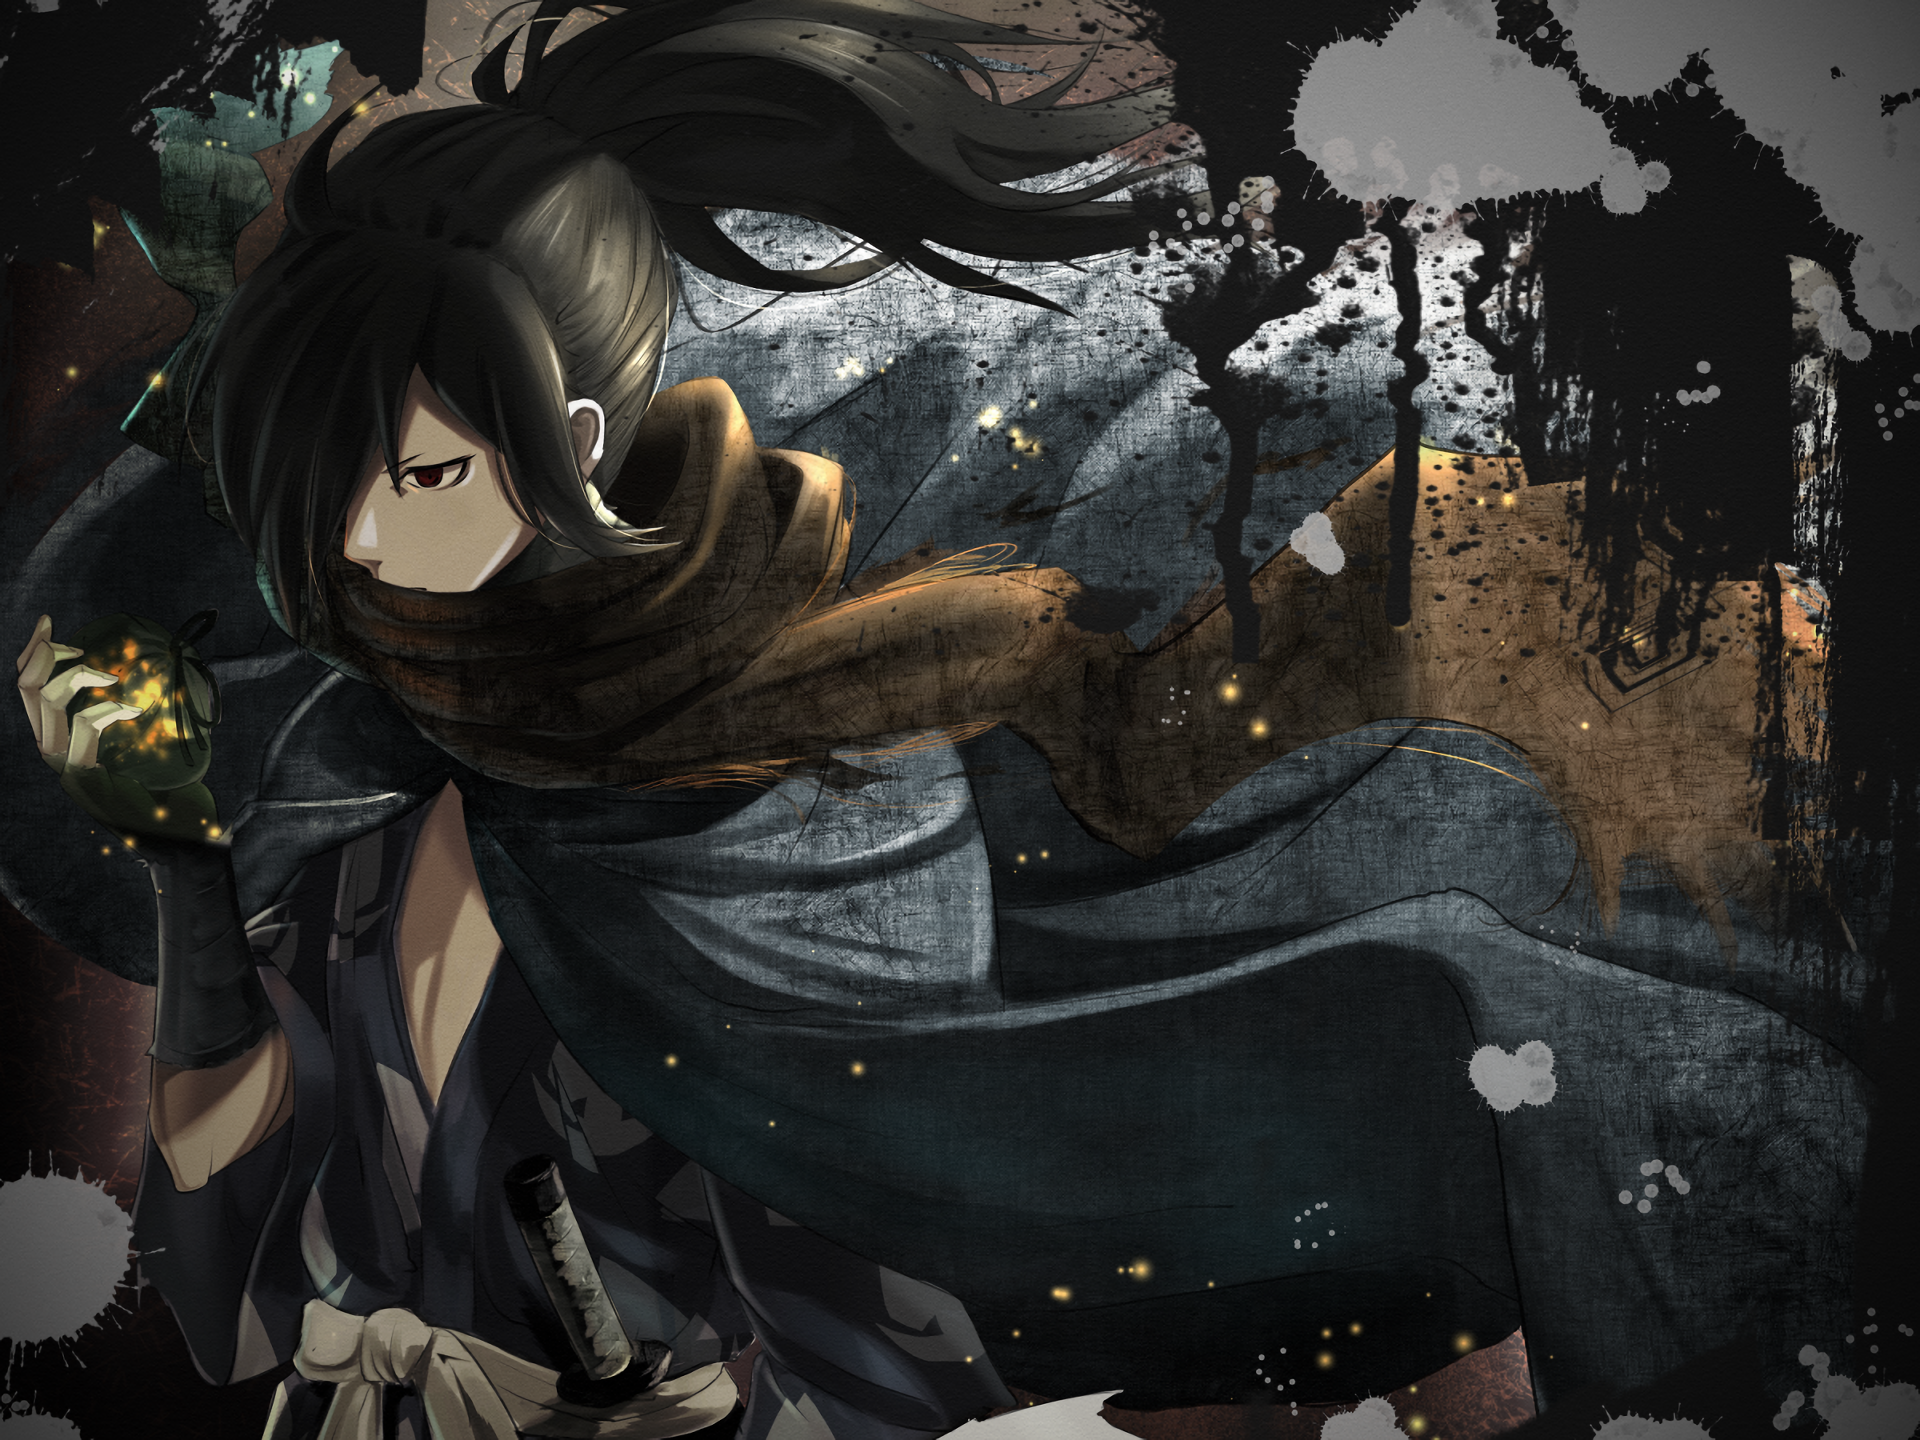 110+ Dororo (Anime) HD Wallpapers and Backgrounds